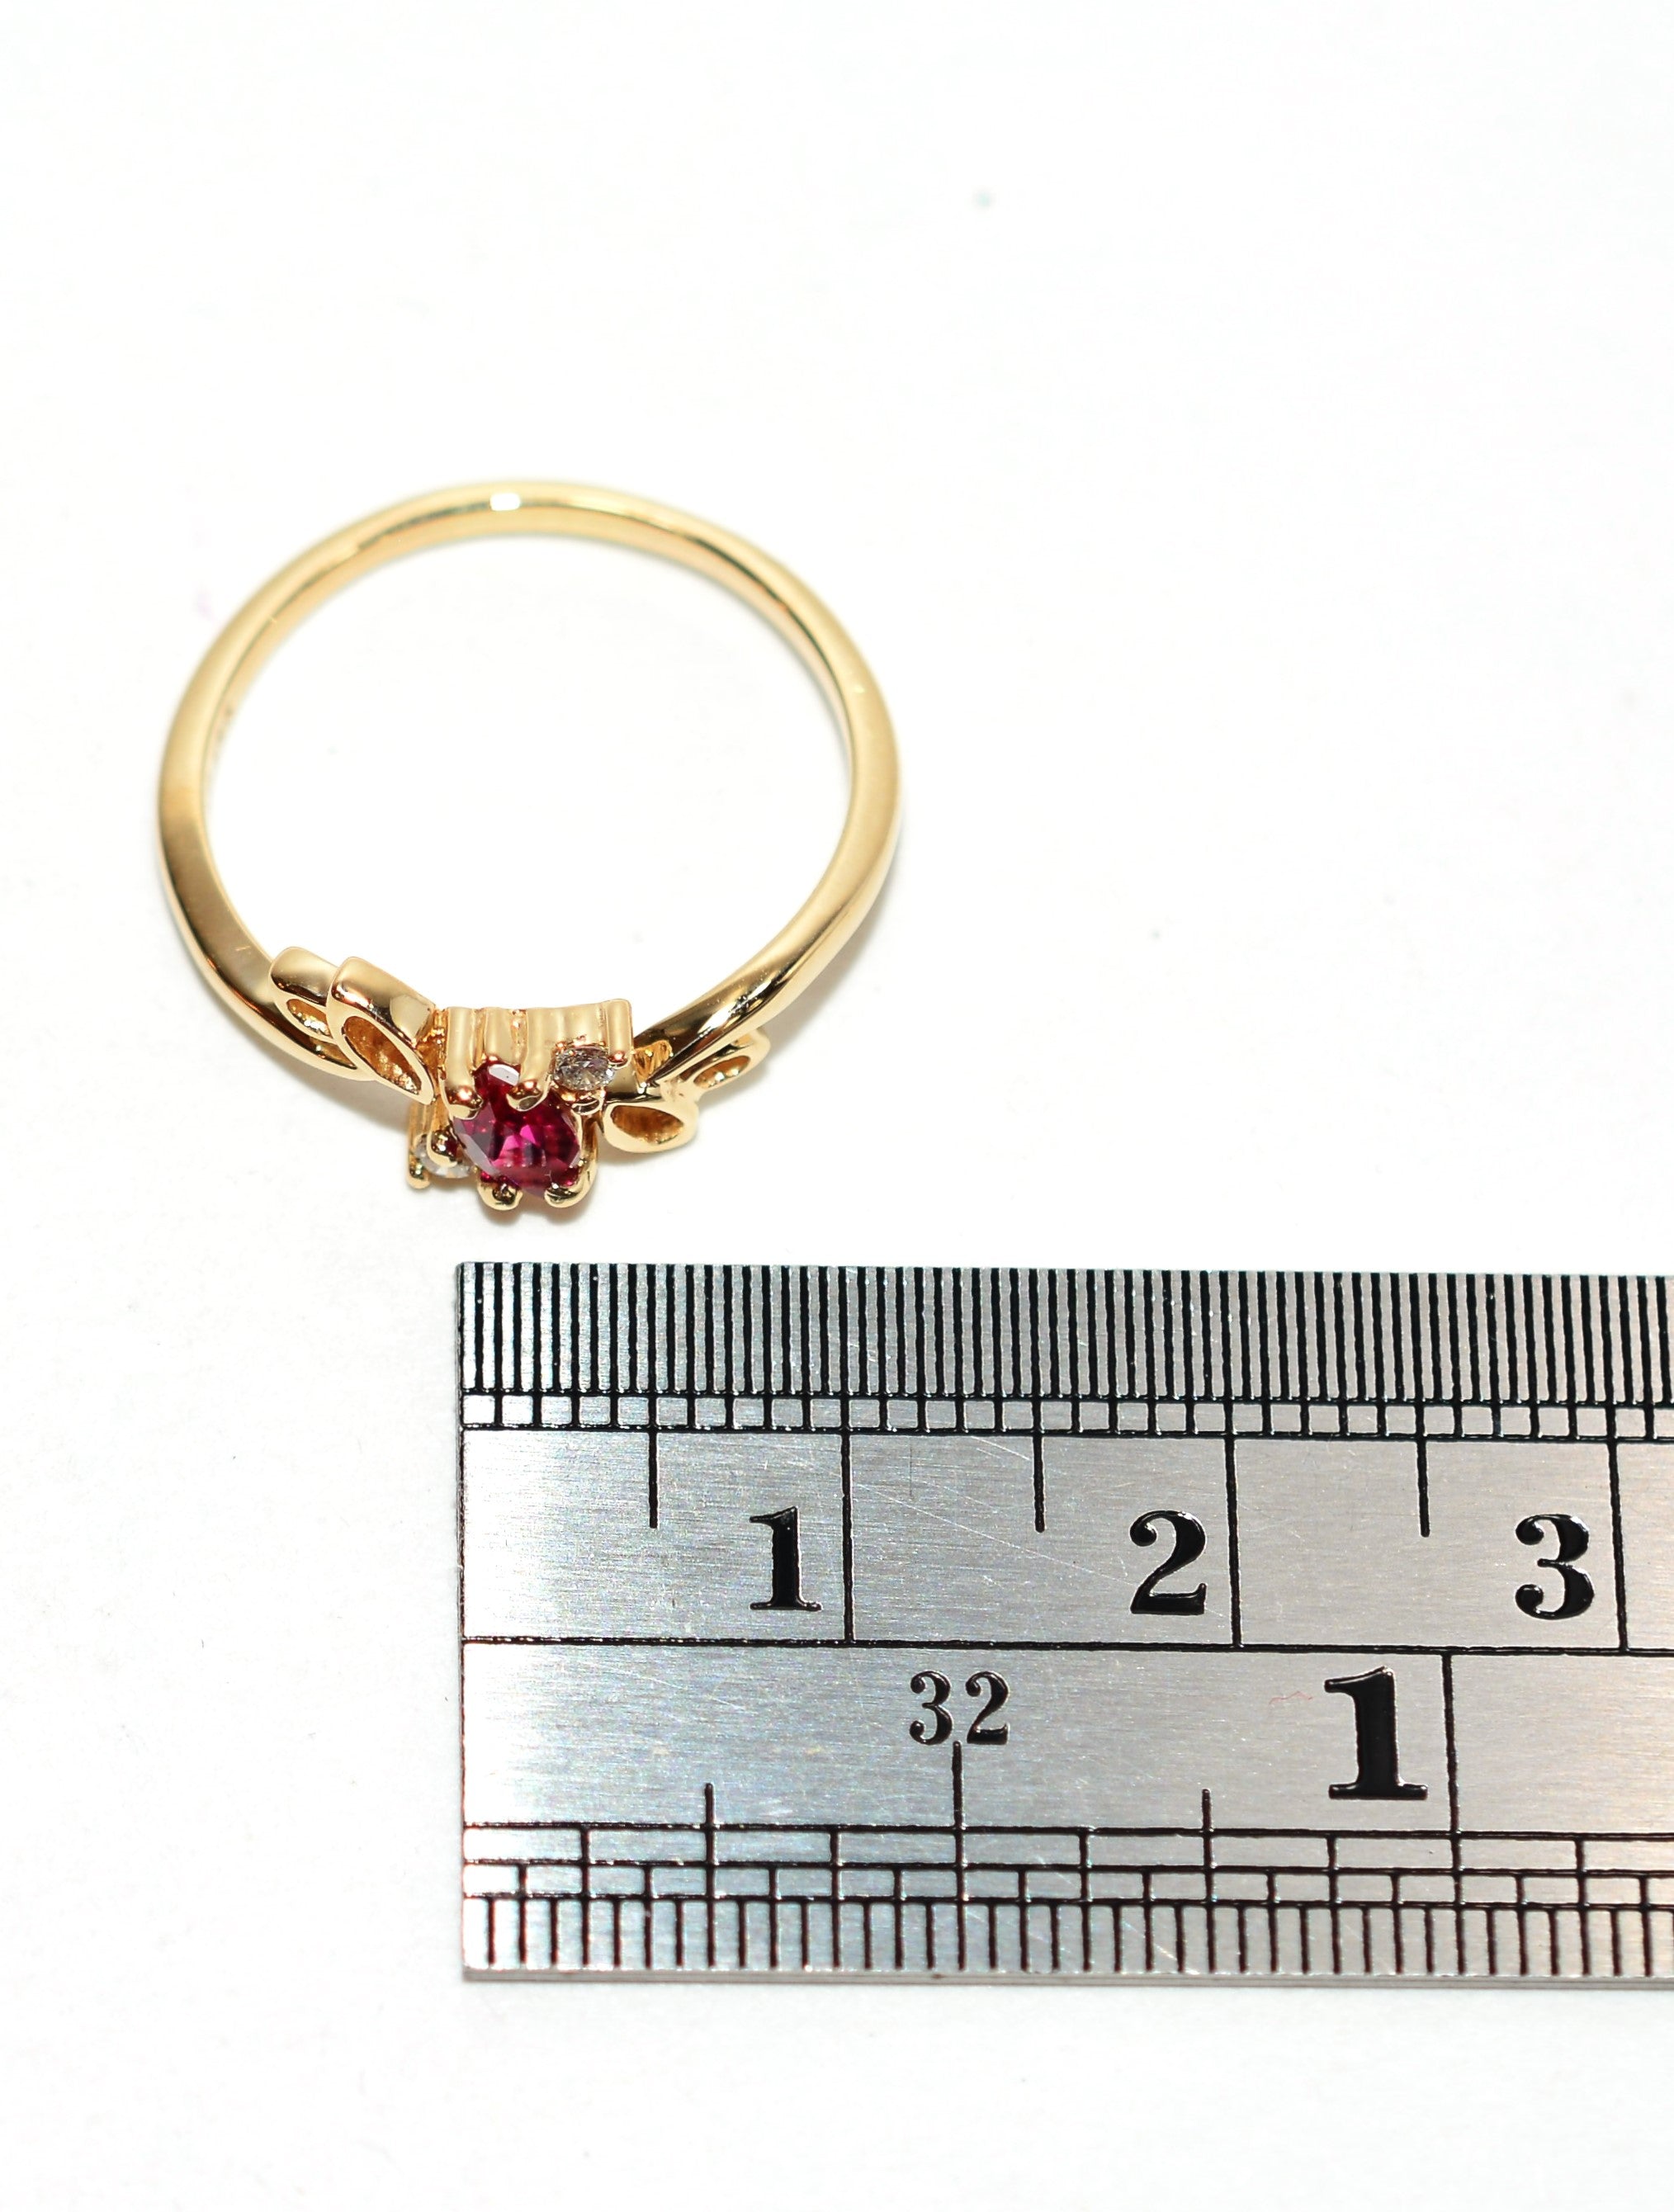 Natural Ruby & Diamond Ring 14K Solid Gold .35tcw Engagement Ring Ruby Ring Birthstone Ring Cocktail Ring Statement Ring Bridal Ring Estate